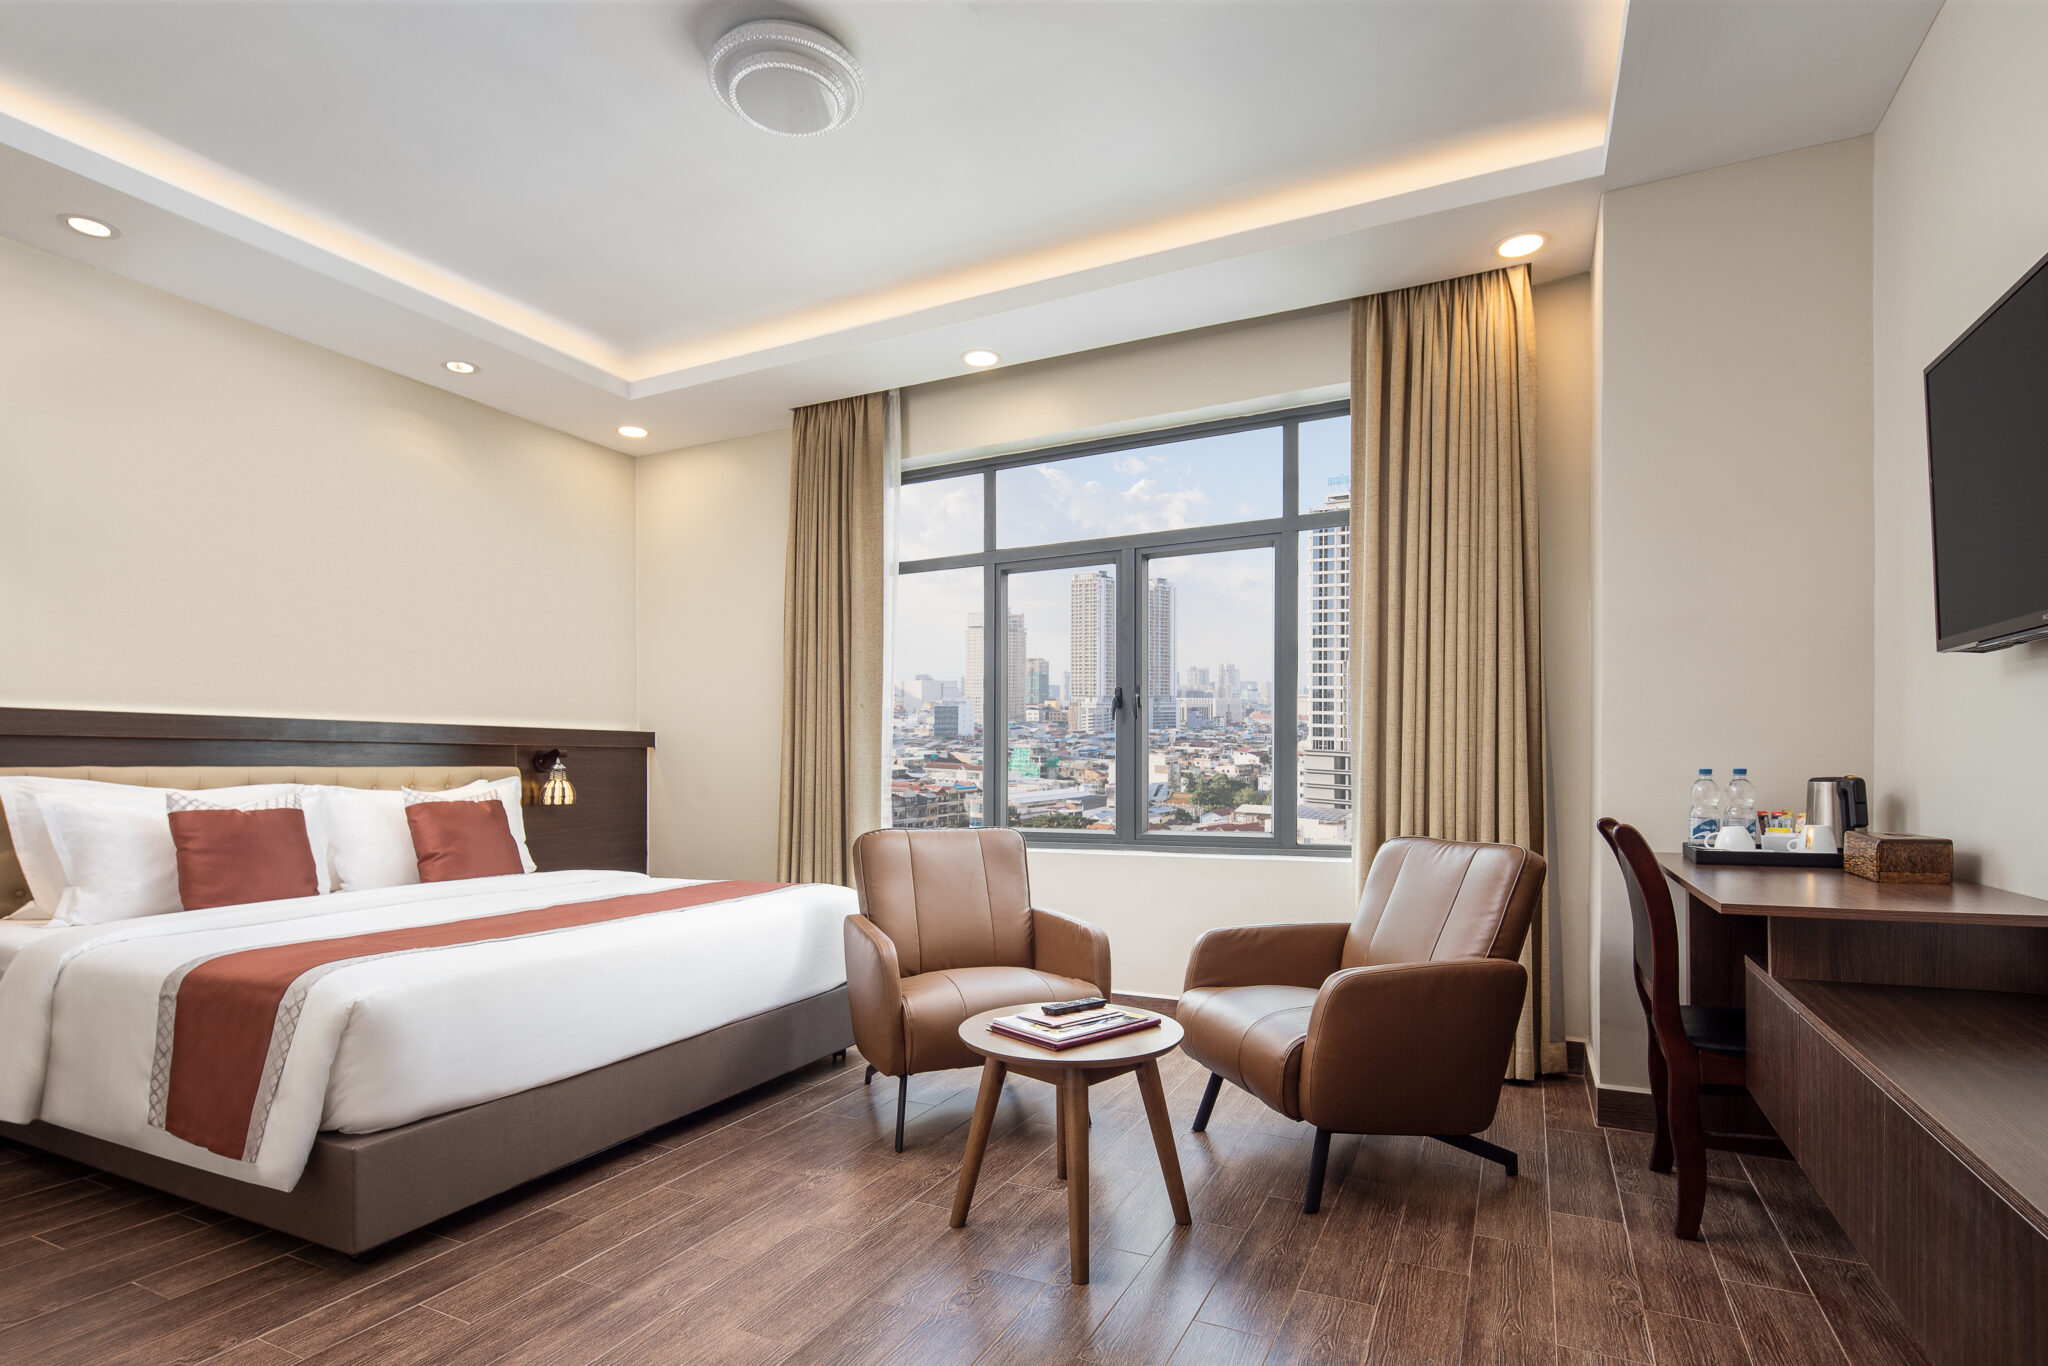 Offers Hm Grand Central Hotel 6012